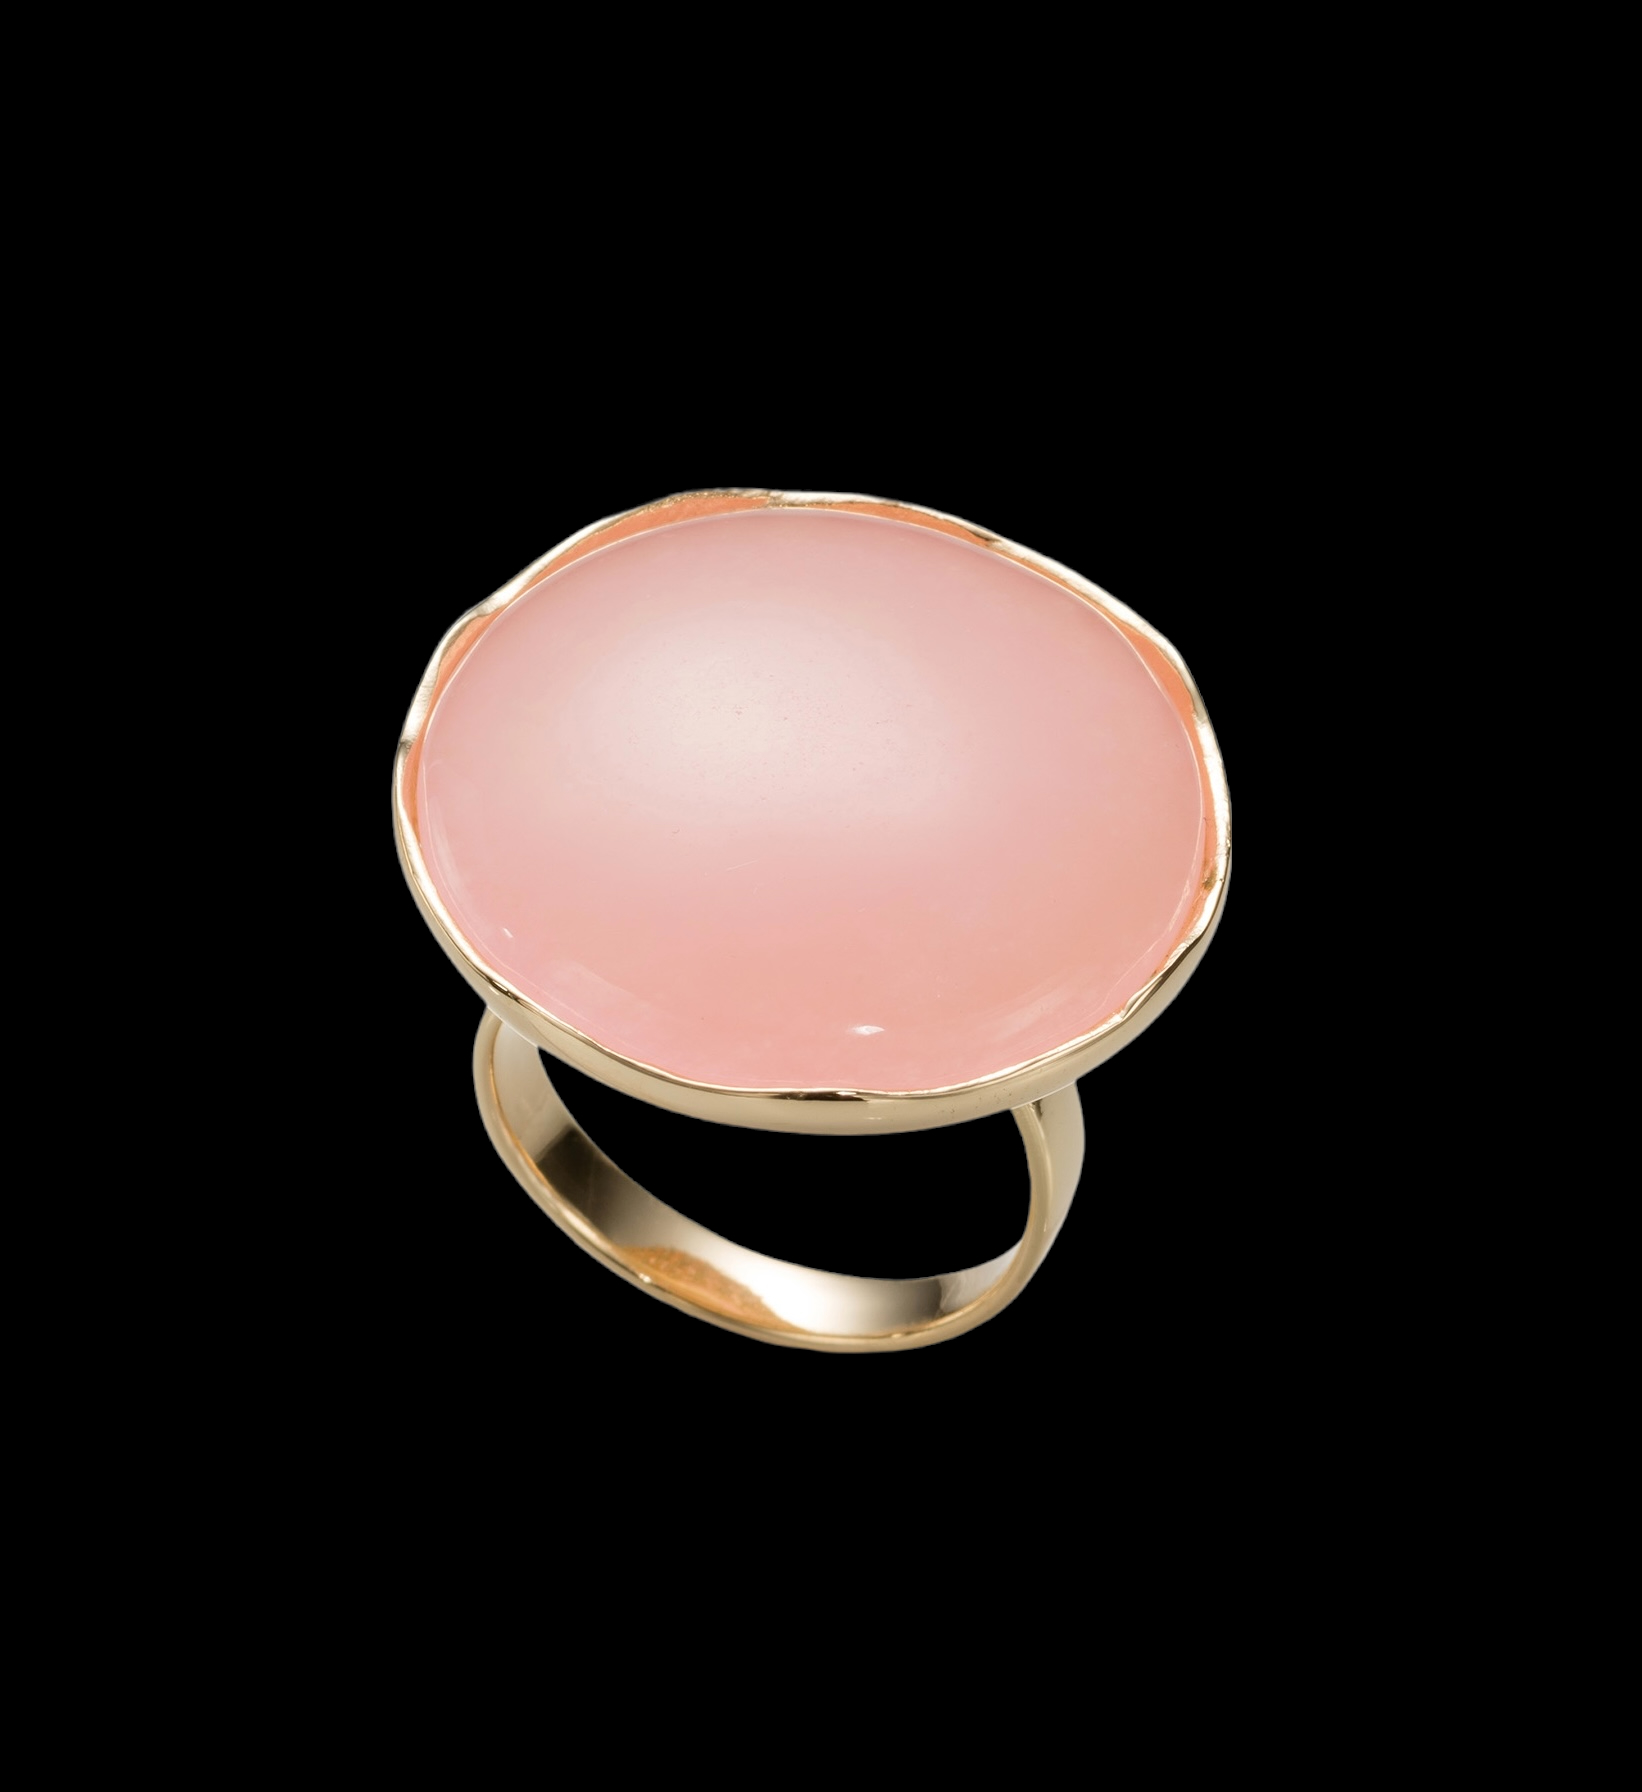 Gold-plated ring with a coral-colored Quartz stone